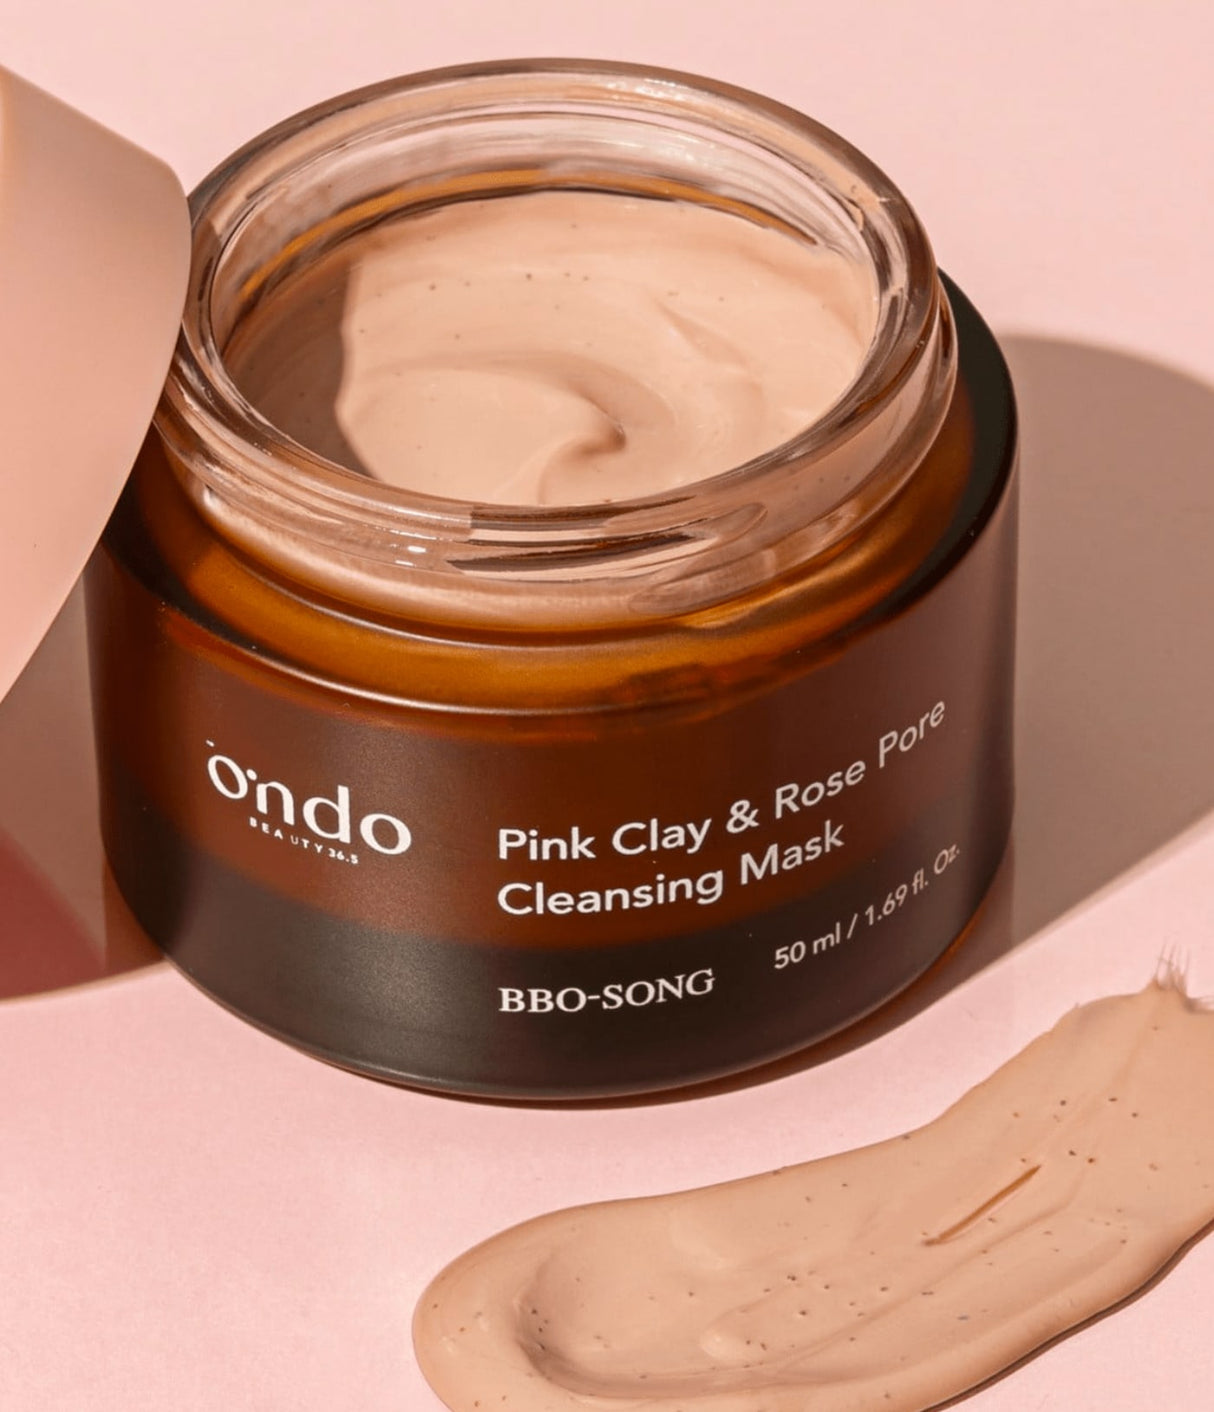 Pink Clay & Rose Pore Cleansing Mask de Ondo Beauty 36.5